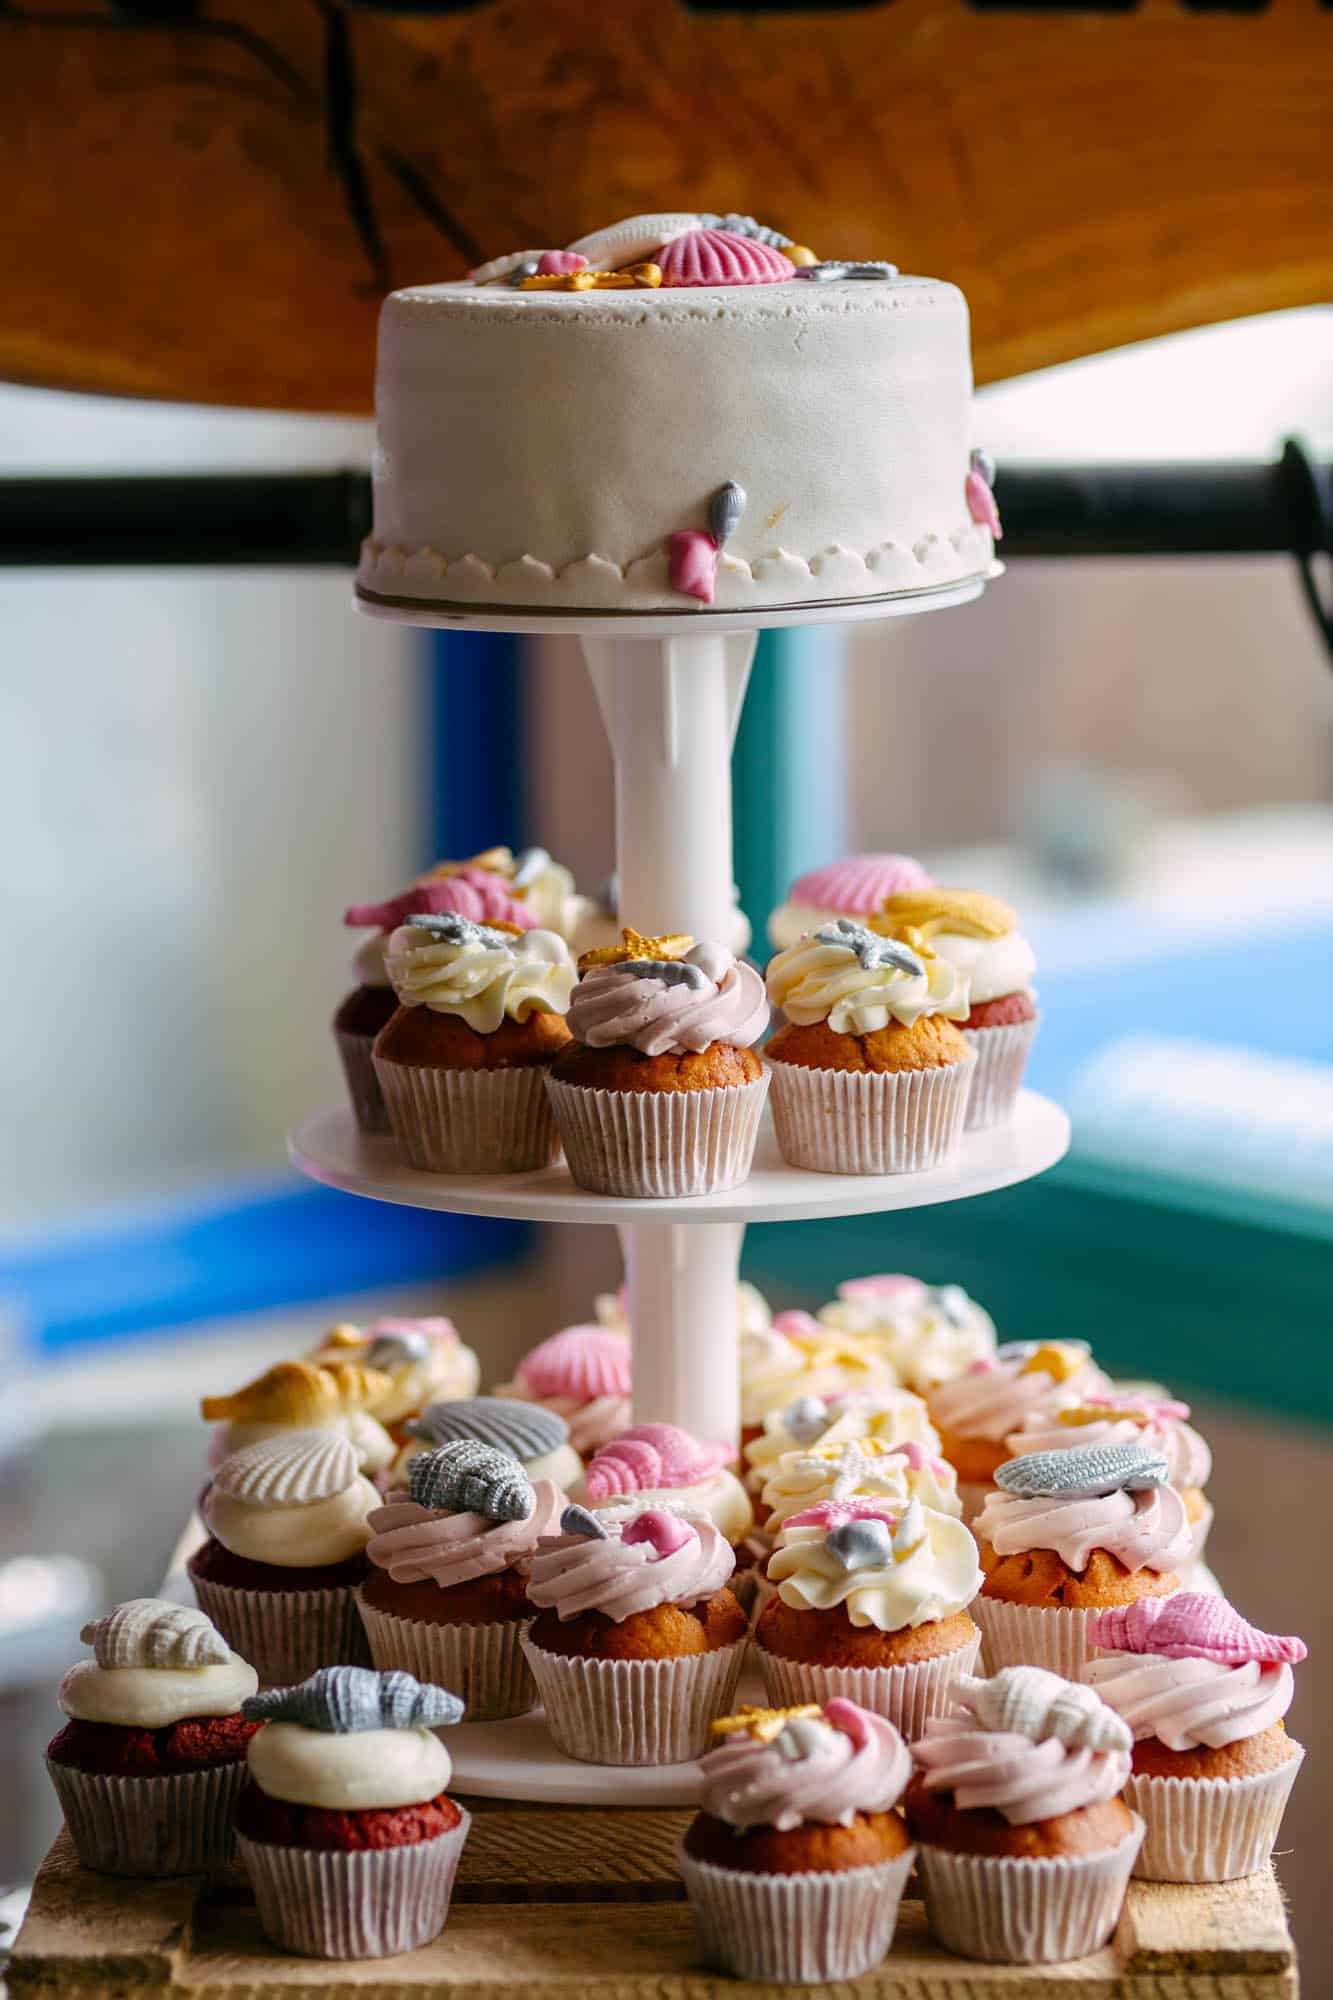 A cake stand with wedding cakes on it.